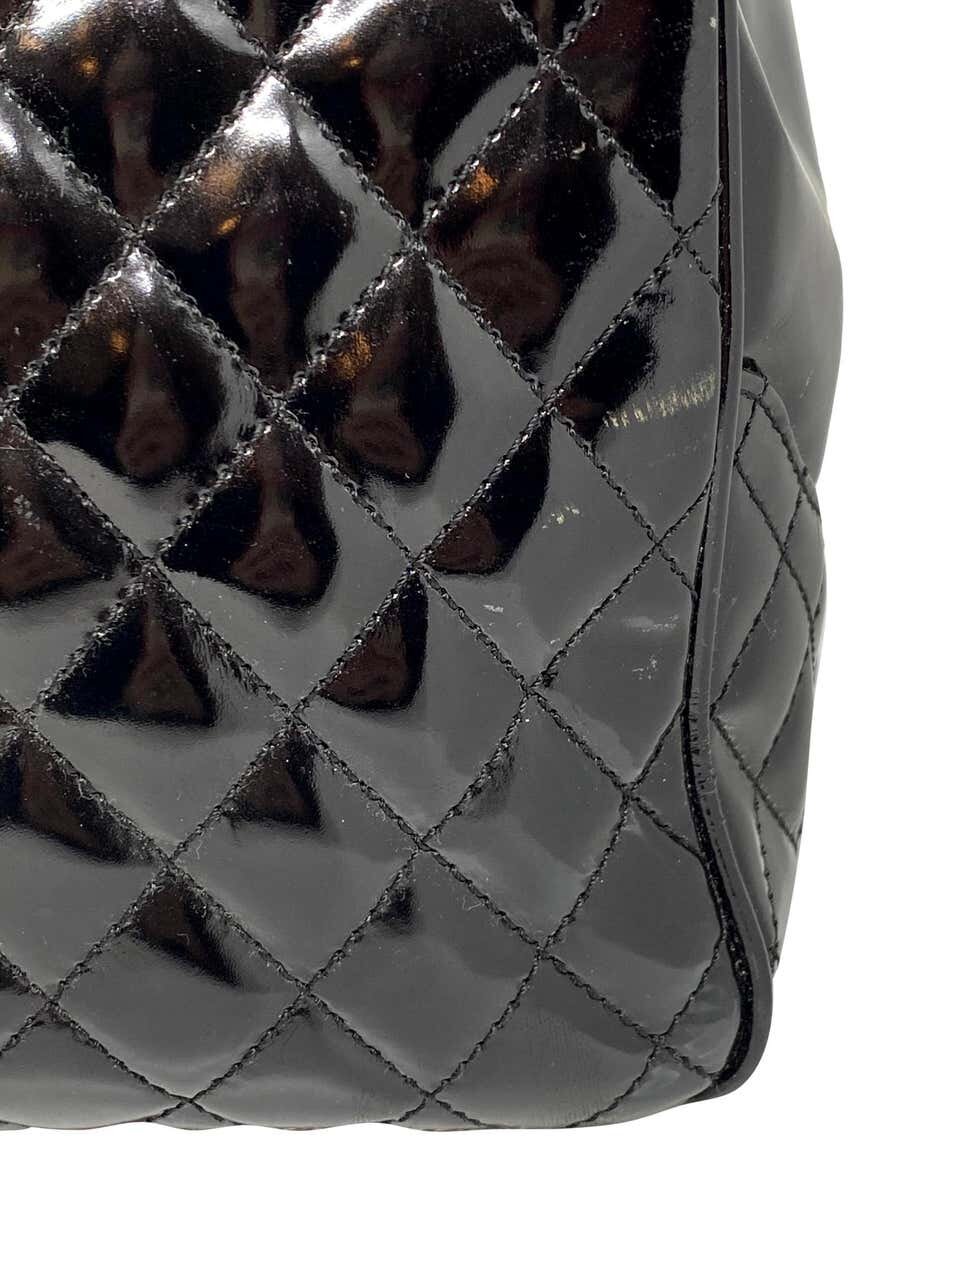 chanel camera bag quilted lambskin